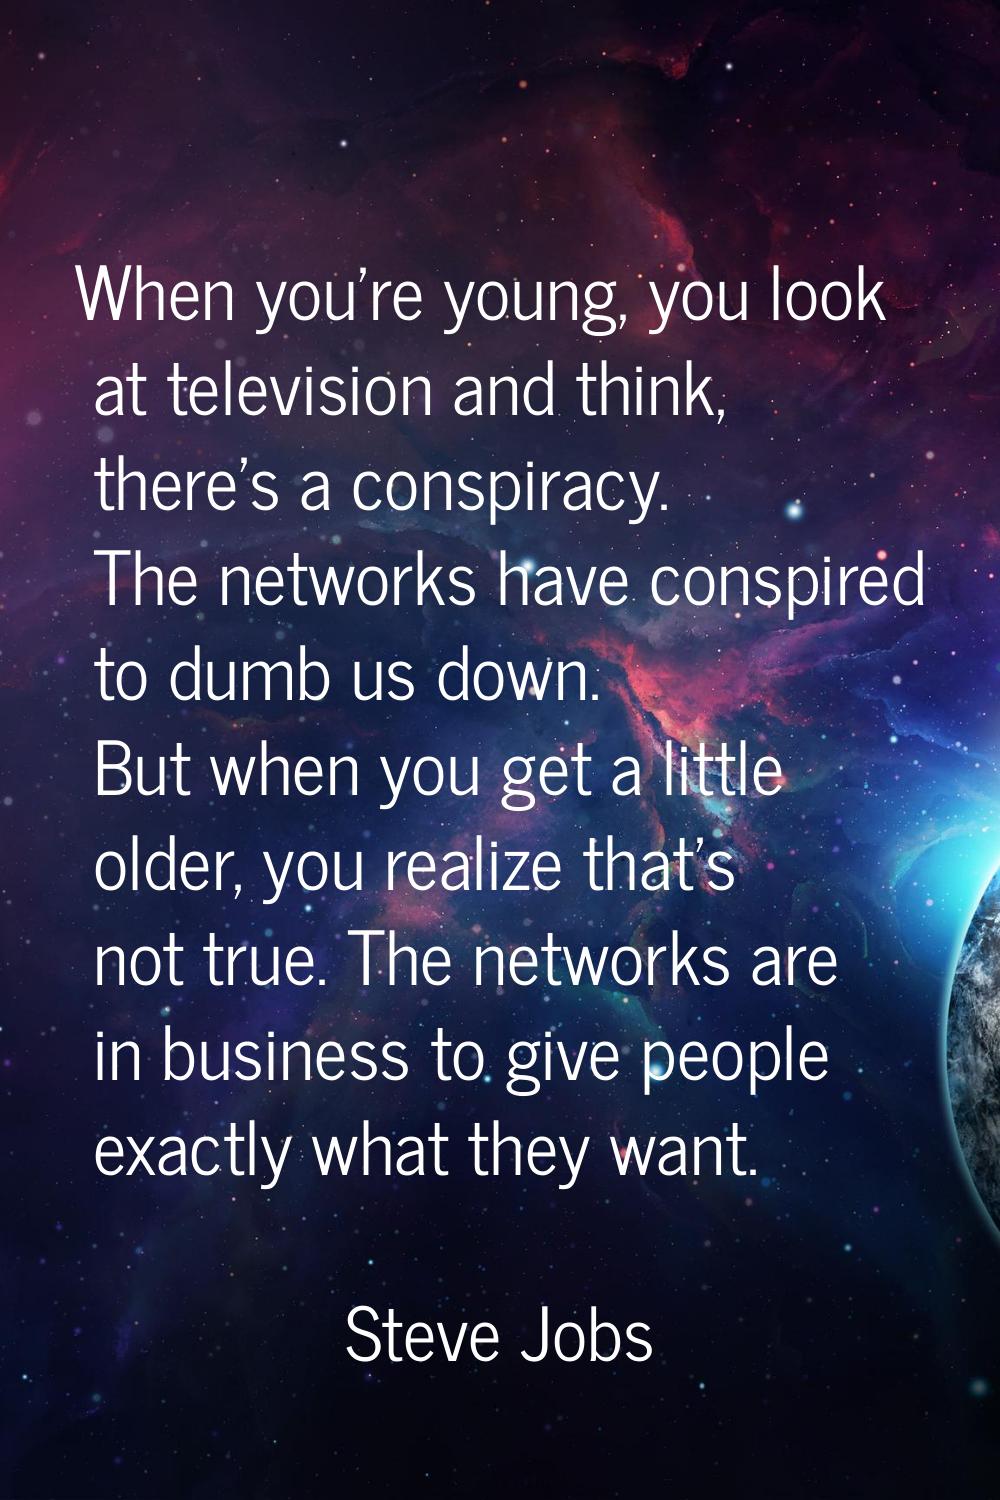 When you're young, you look at television and think, there's a conspiracy. The networks have conspi